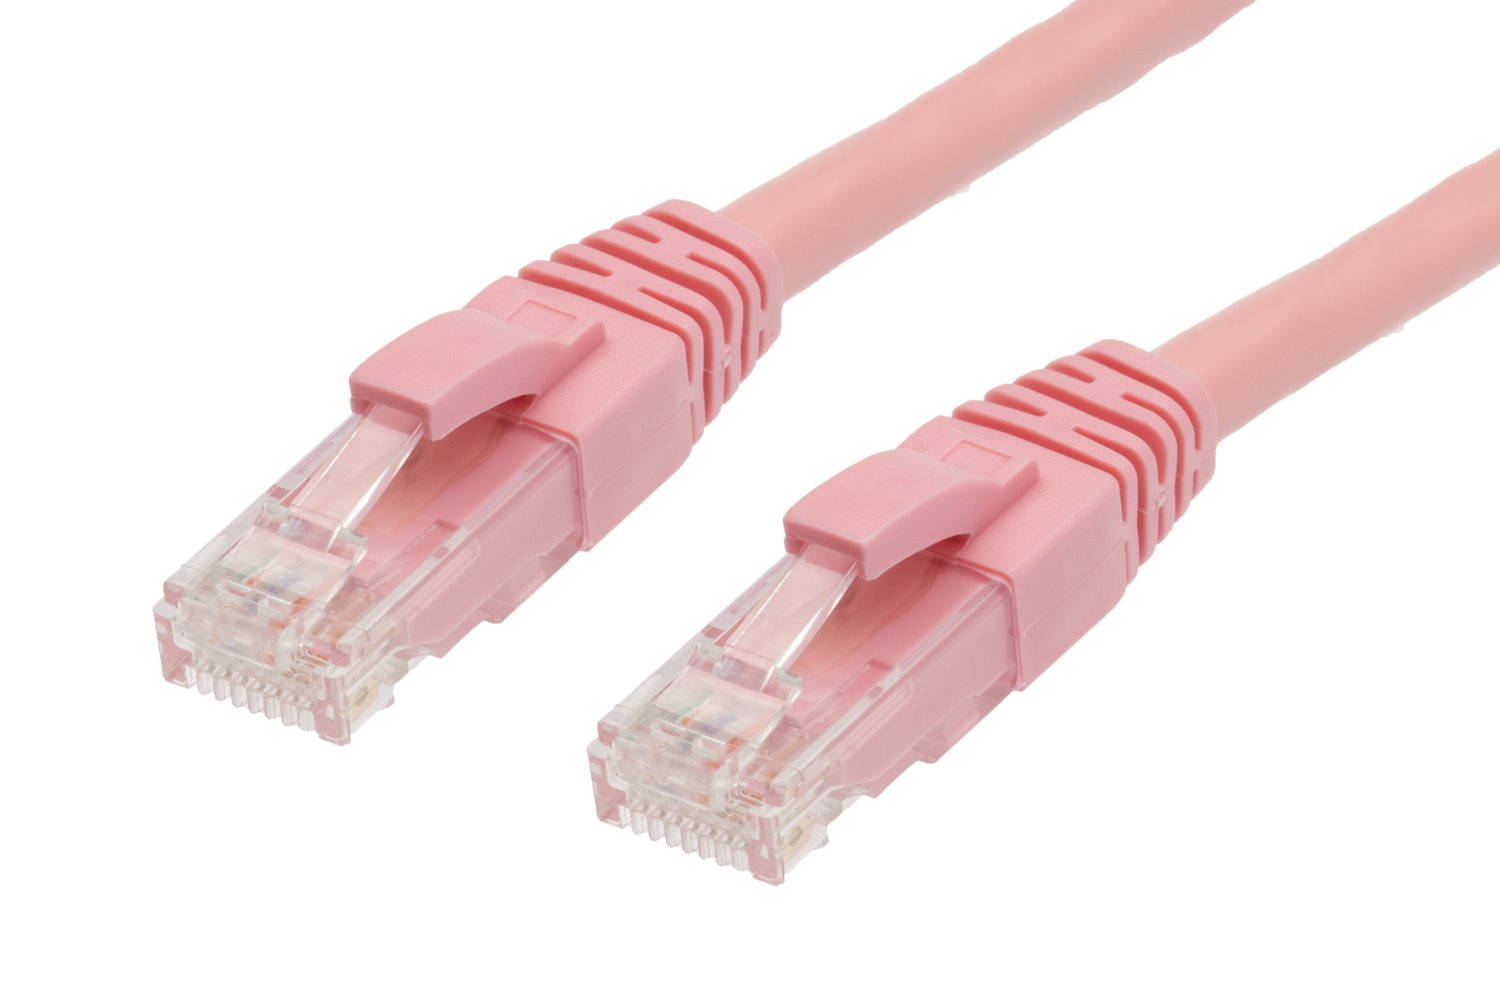 4Cabling 0.25M RJ45 Cat6 Ethernet Cable. Pink